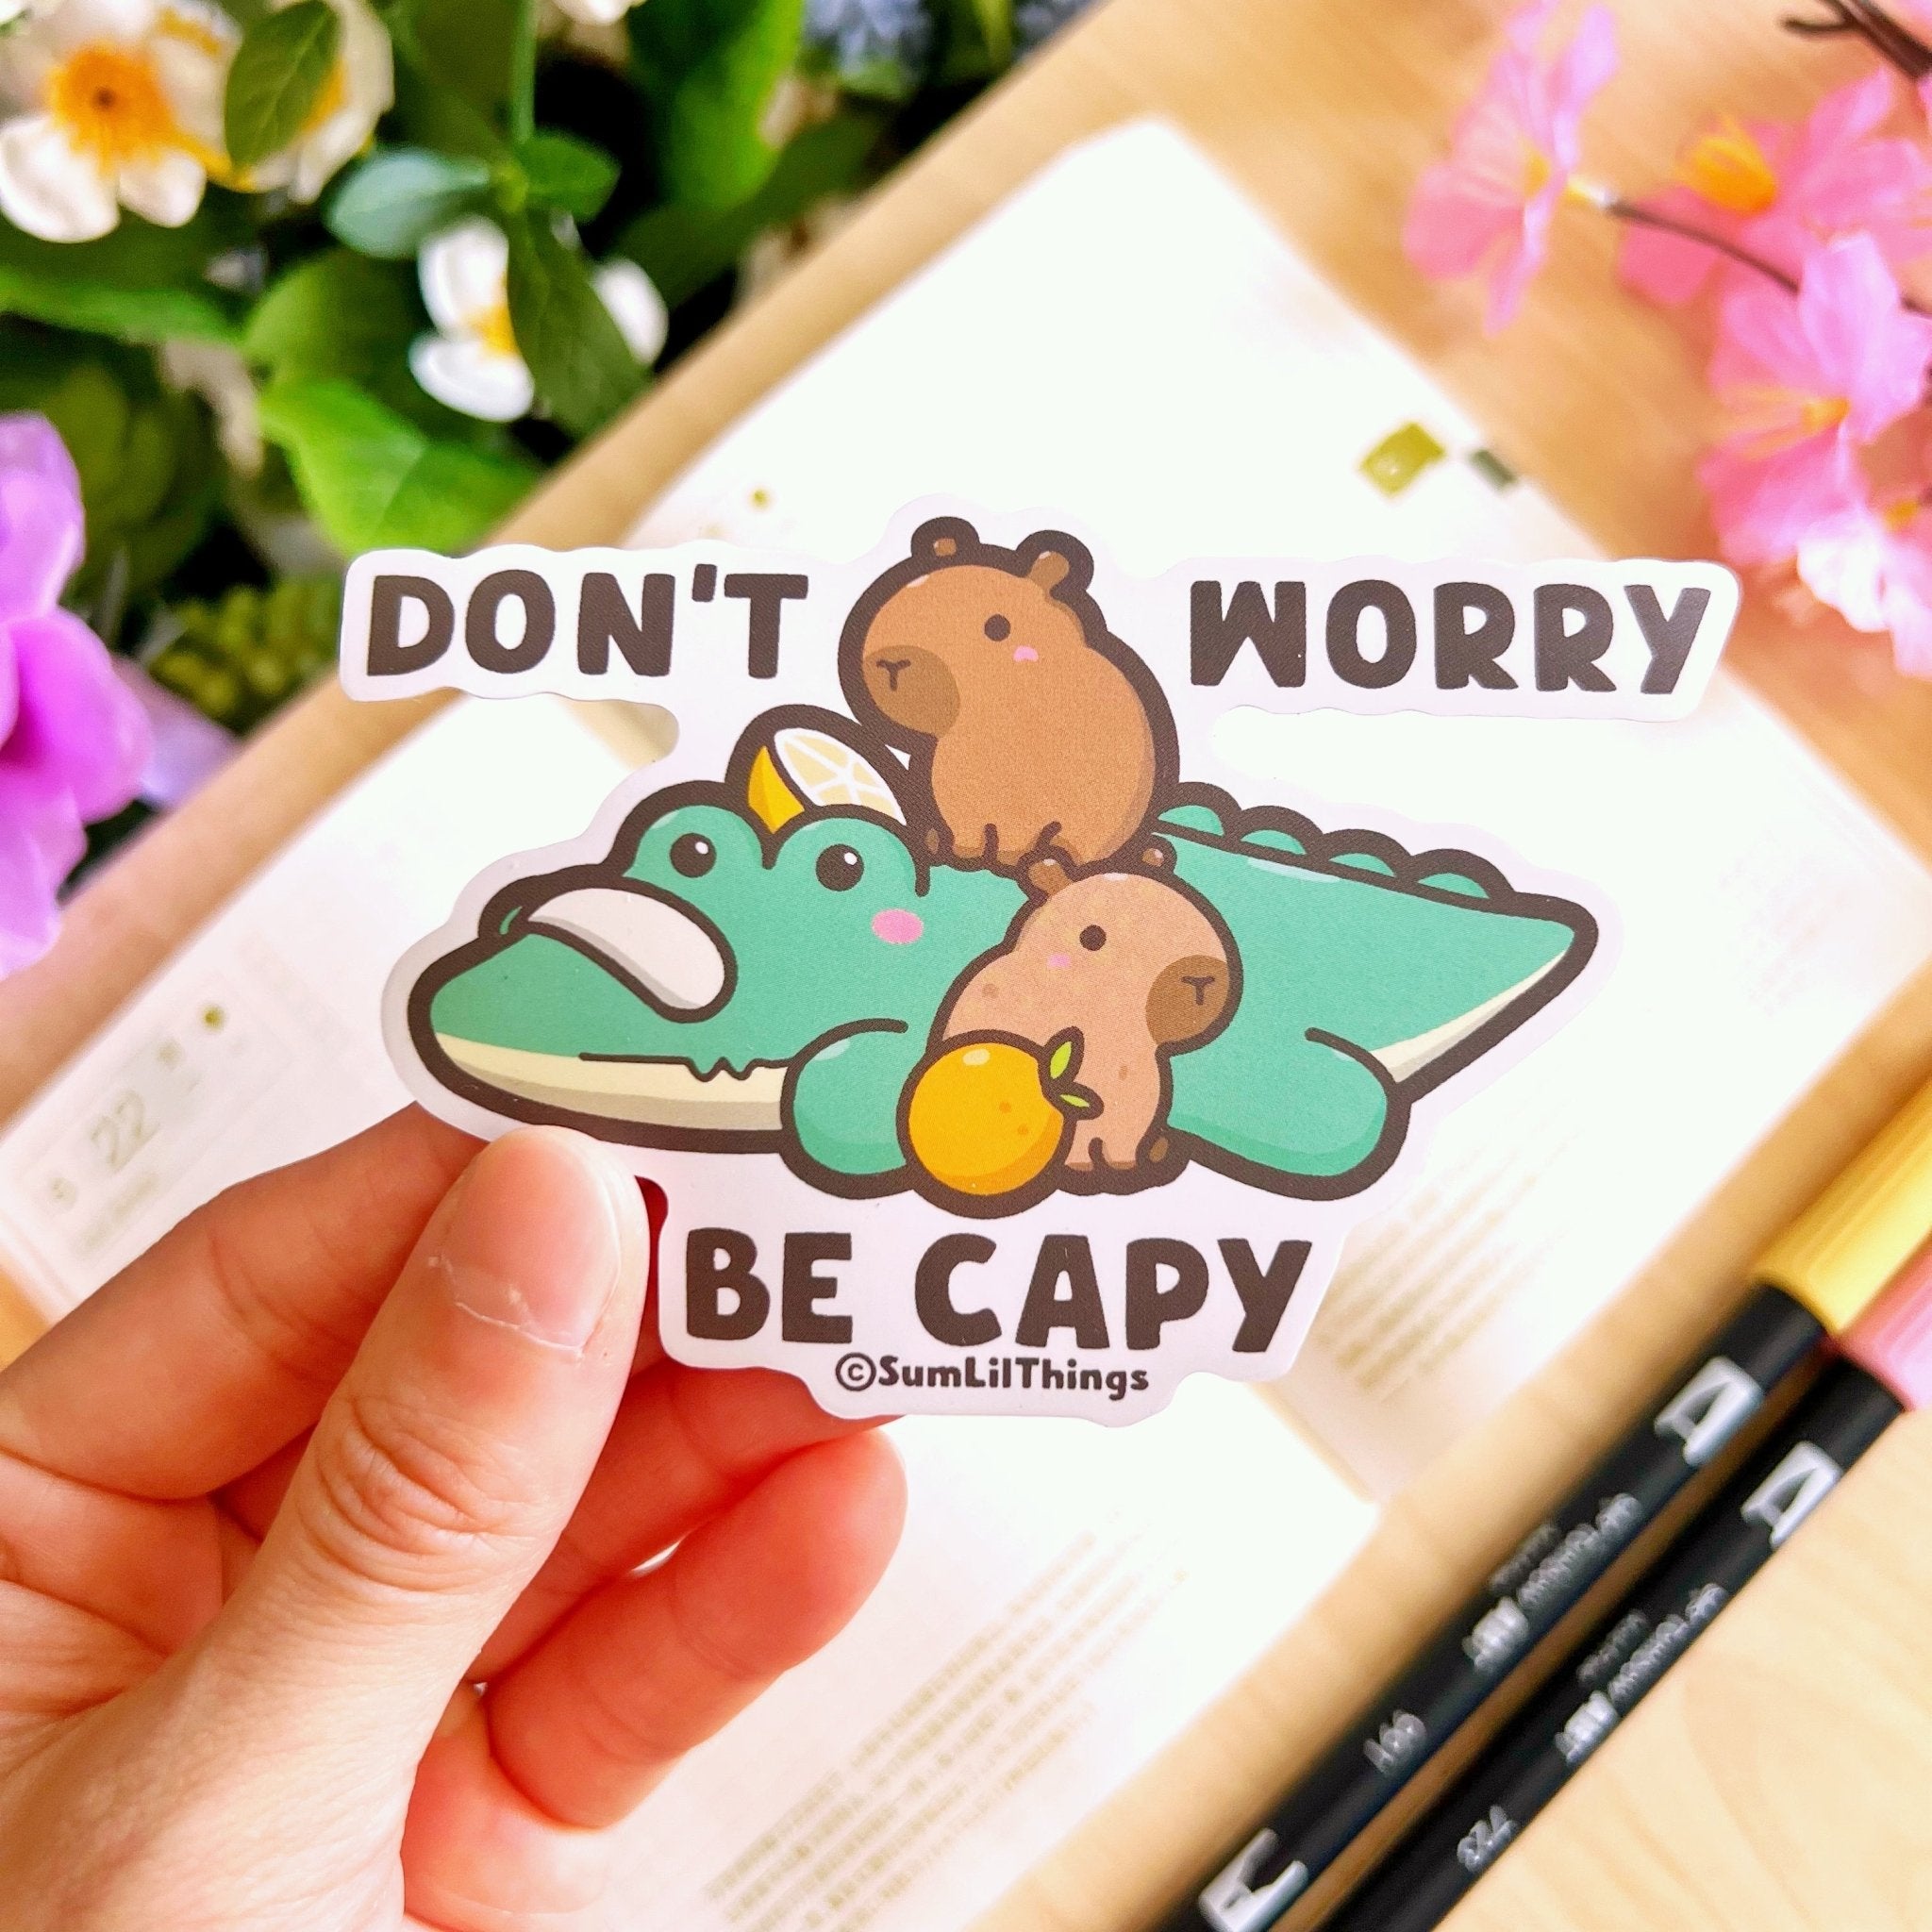 Vinyl Sticker - Don't Worry Be Capy - SumLilThings